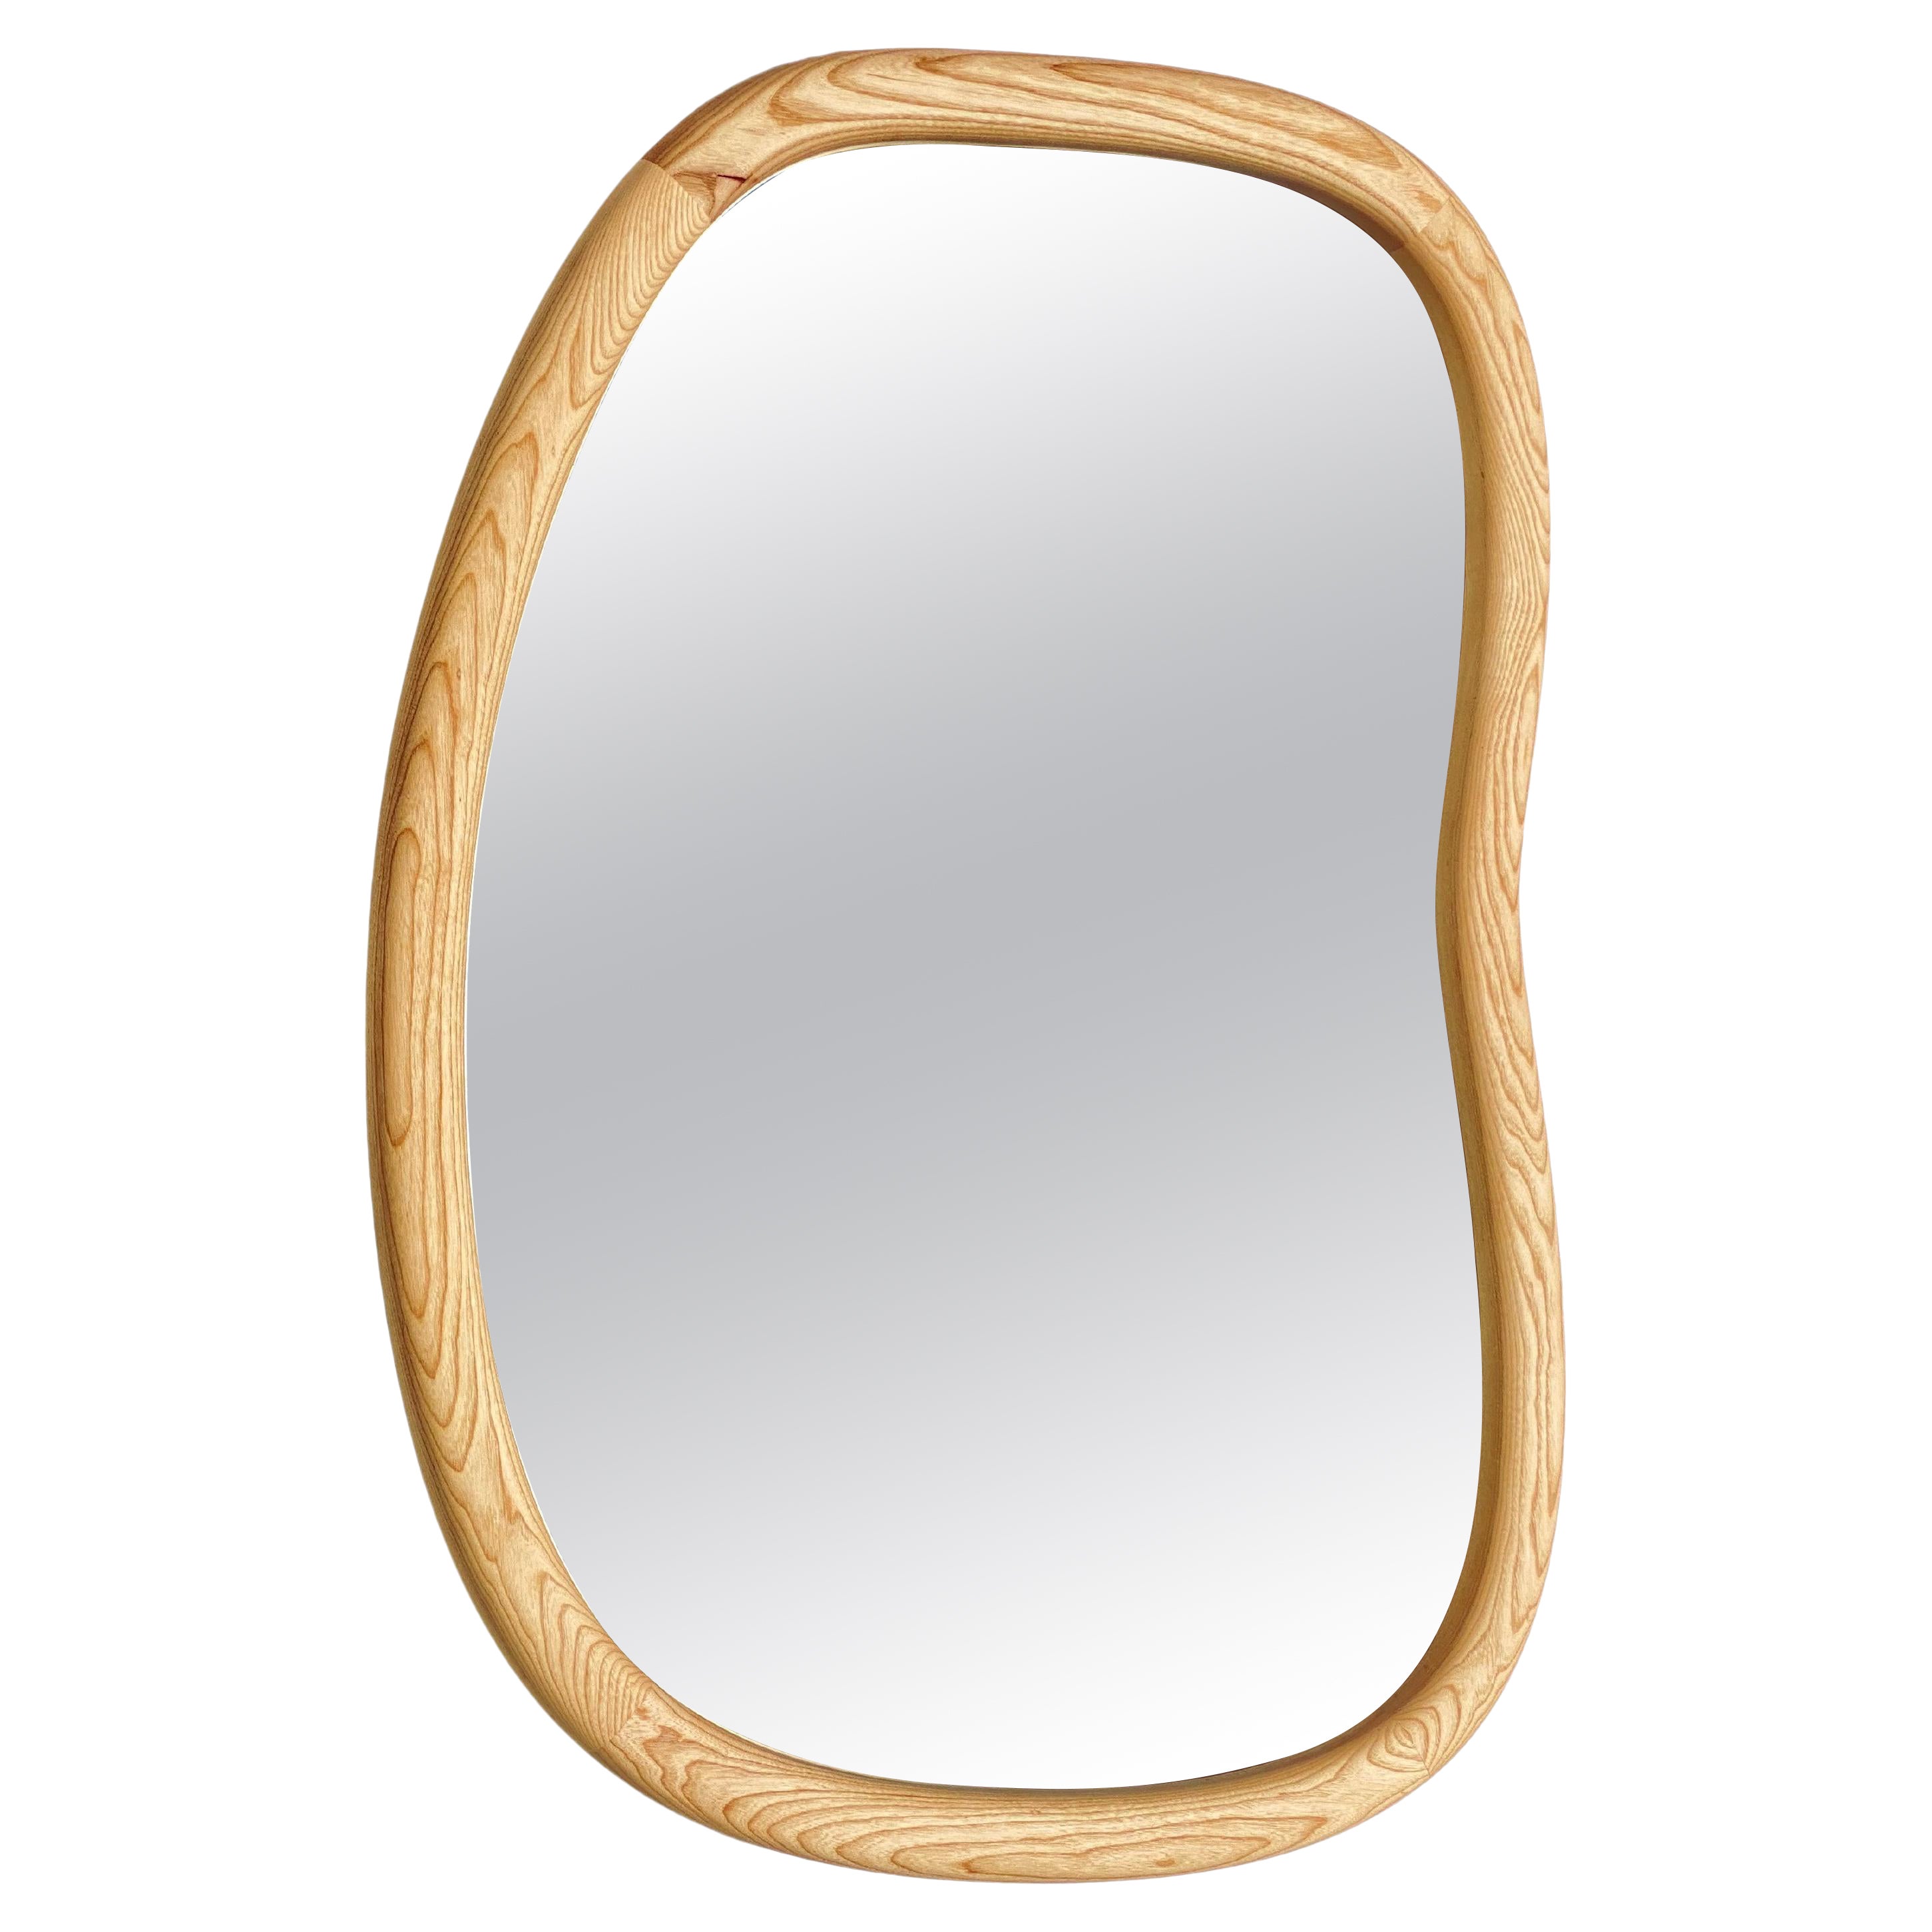 Sarpa mirror - medium size wall mirror in natural ash by KLN Studio For Sale